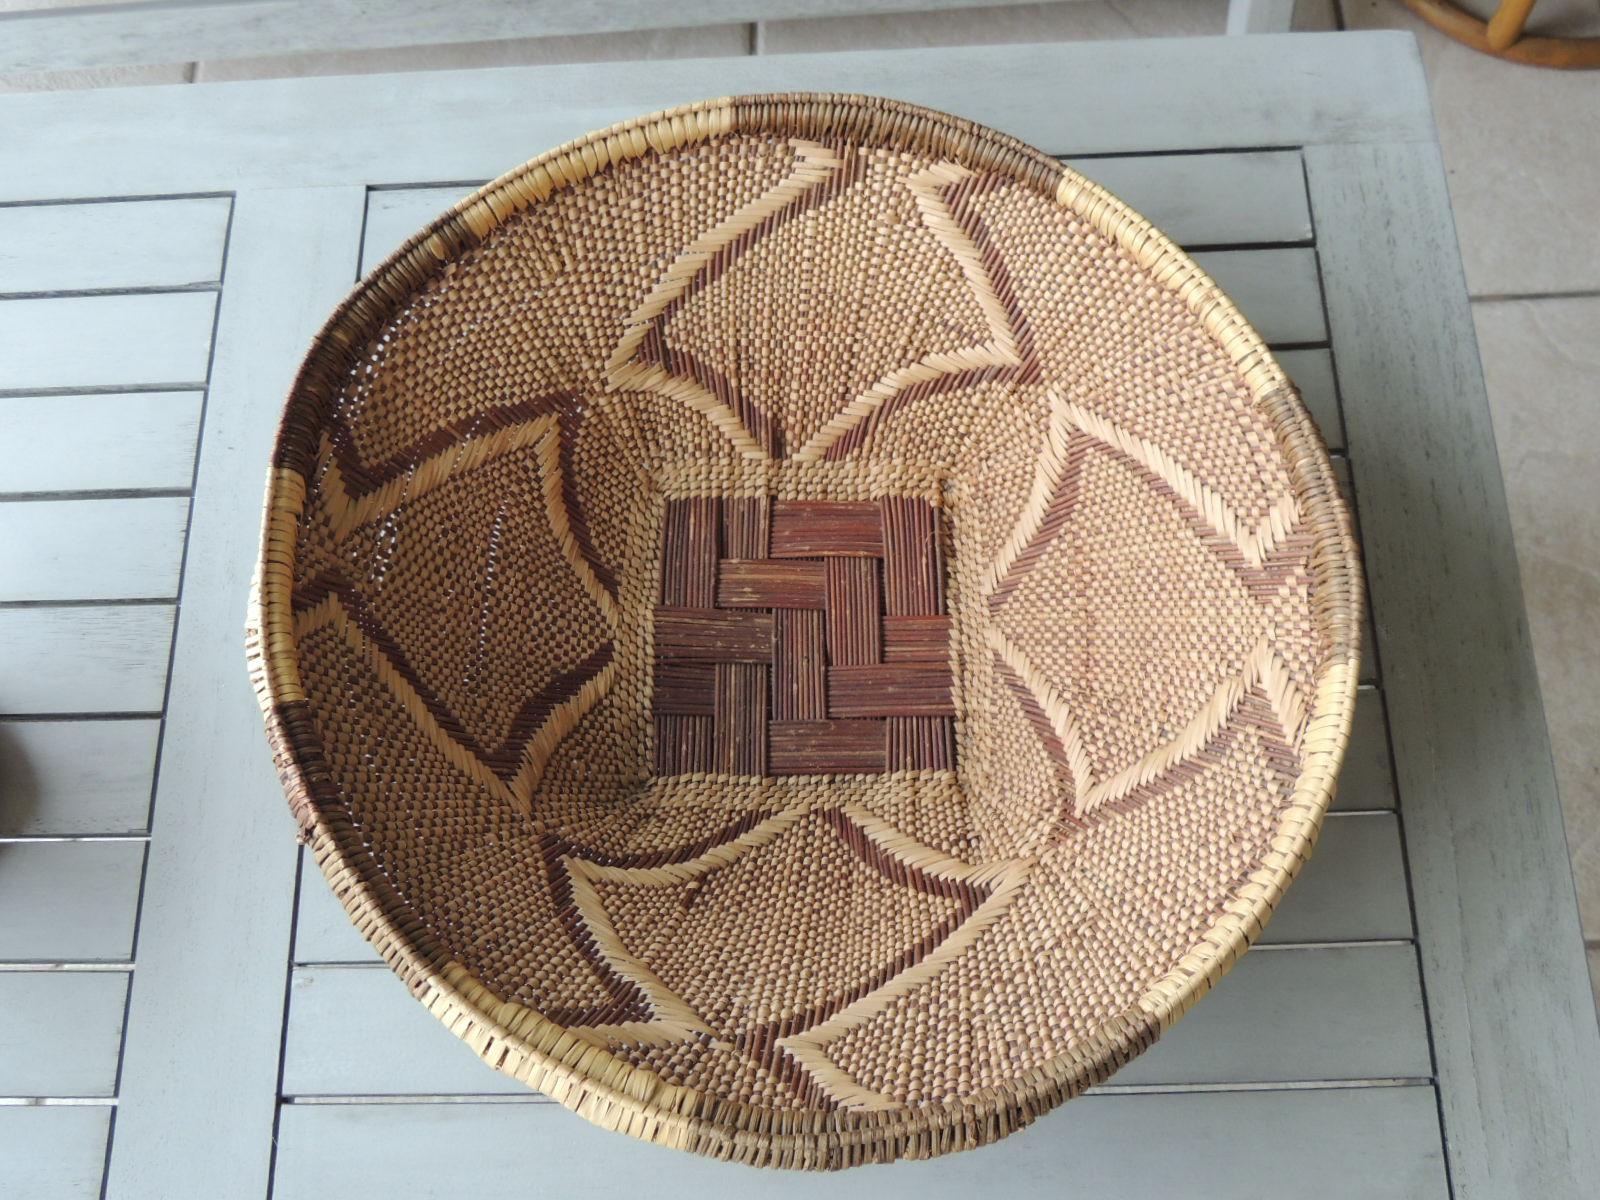 Vintage tribal tan and brown woven round African basket.
Tribal woven pattern and coiled rim.
Size: 16